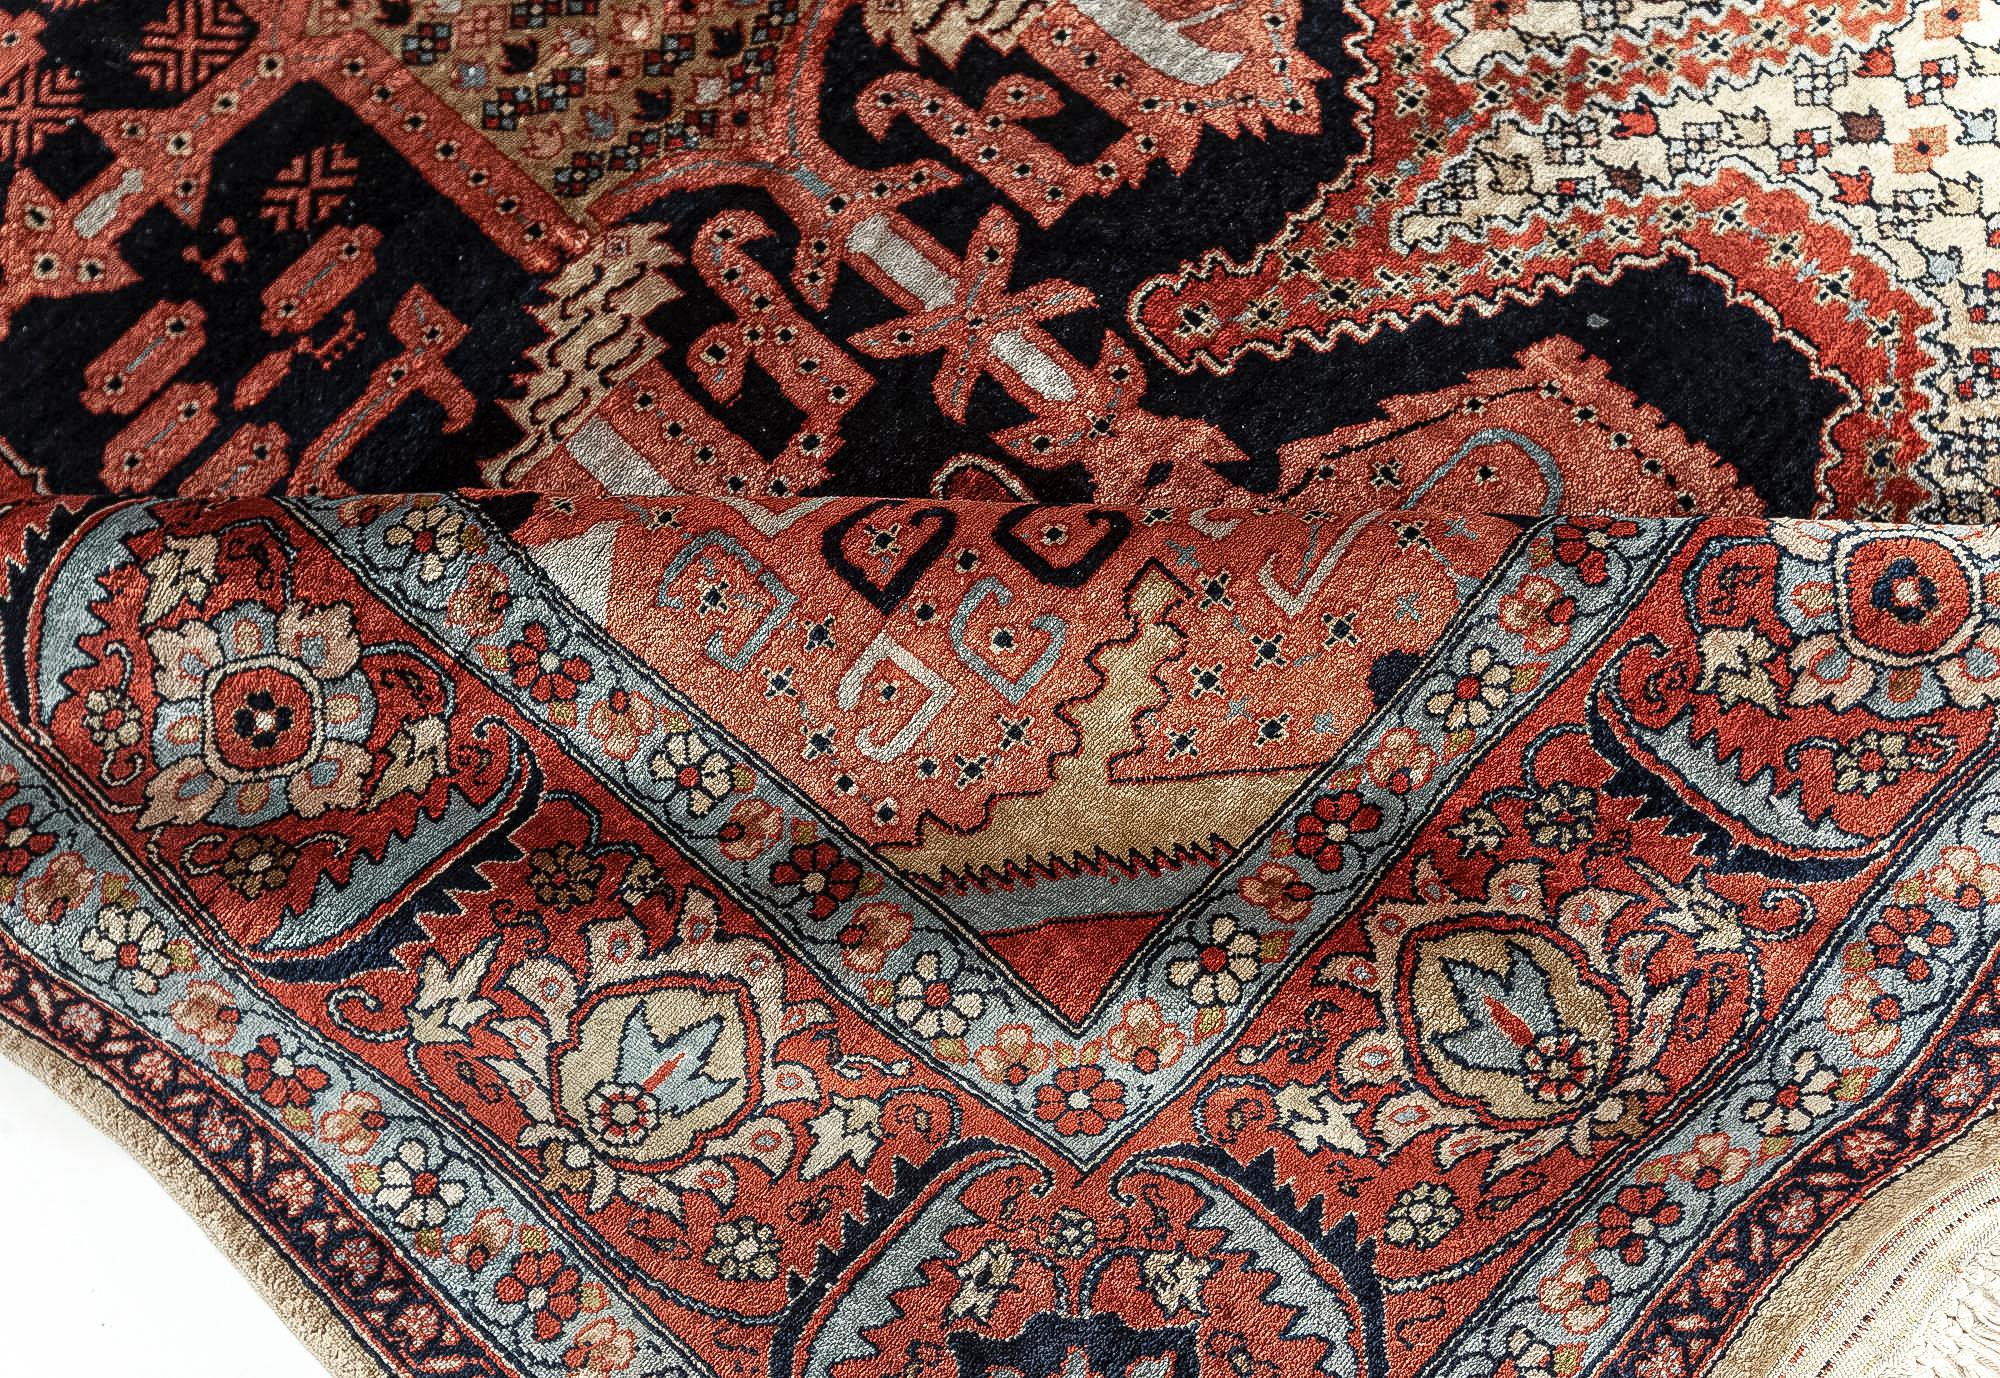 Authentic Persian Tabriz Handmade Silk Rug in Beige, Blue and Red
Size: 4'1